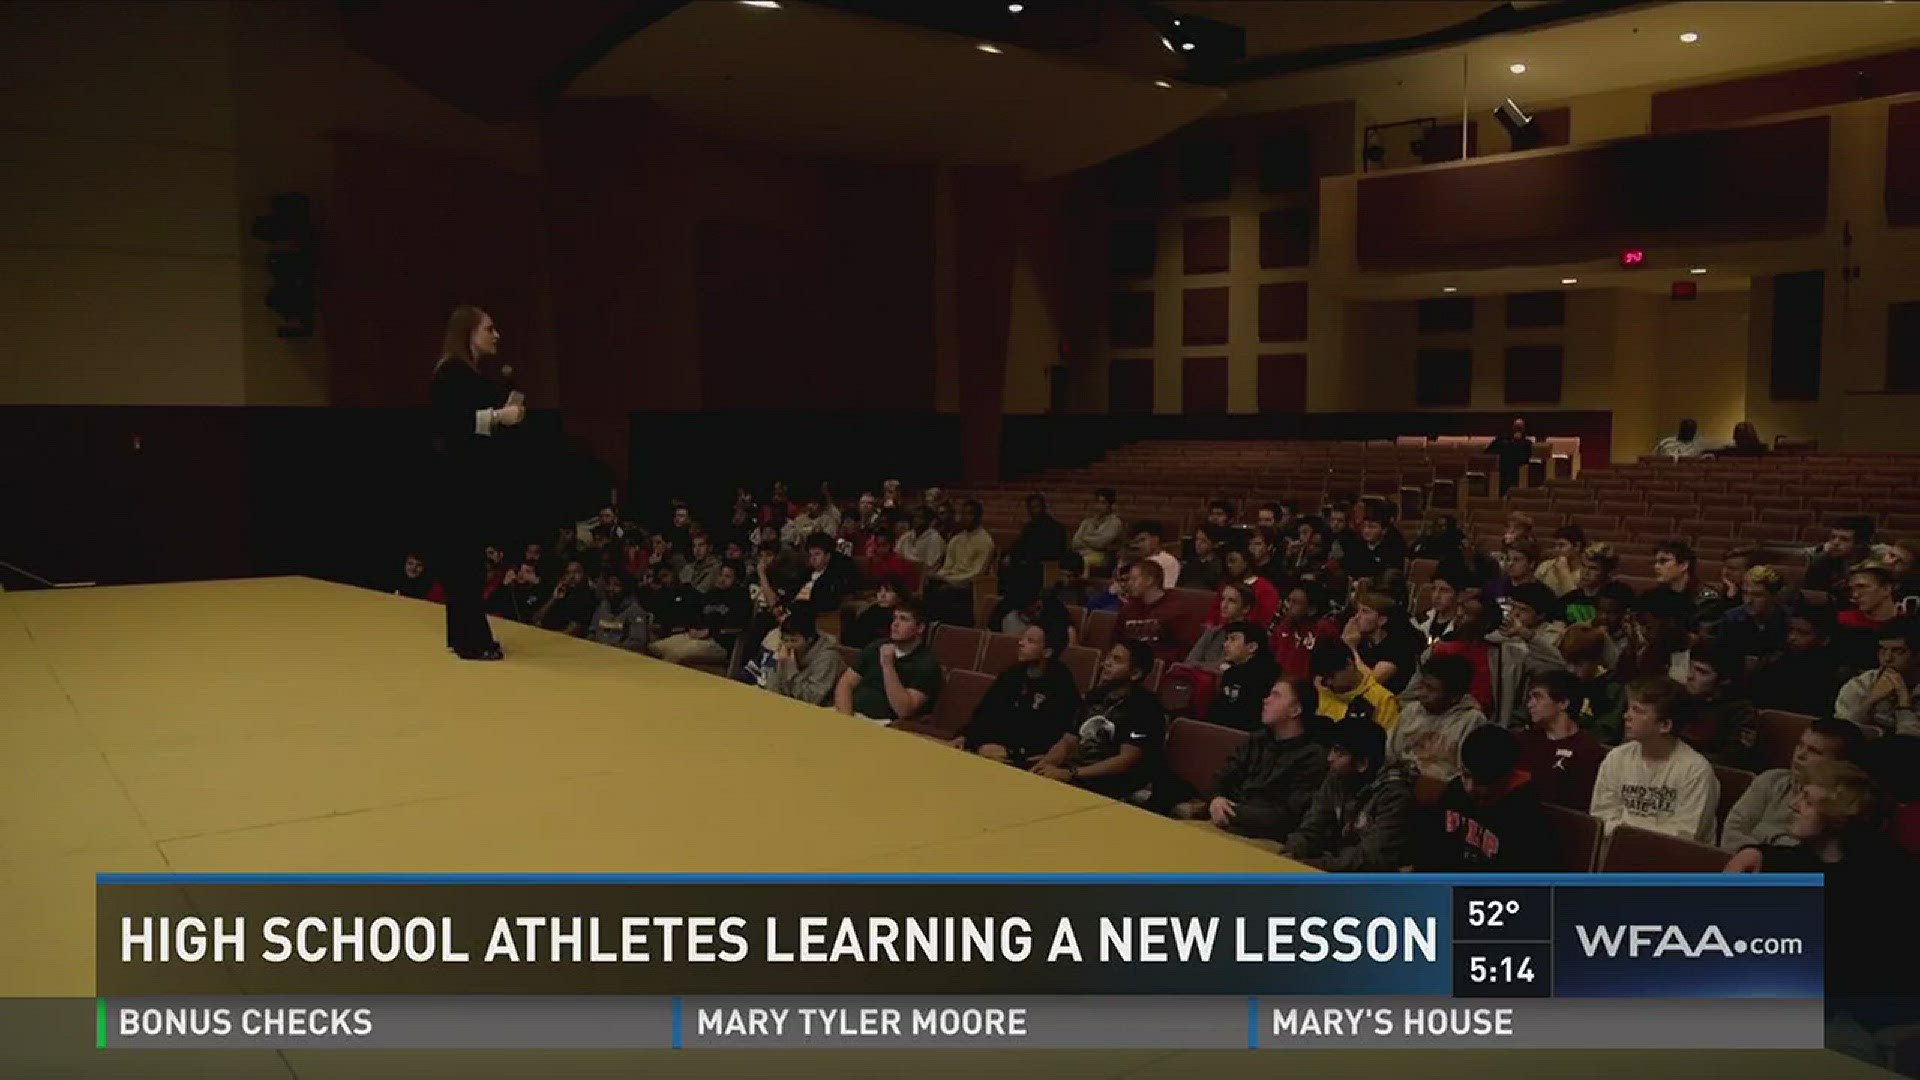 HIGH SCHOOL ATHLETES LEARNING A NEW LESSON